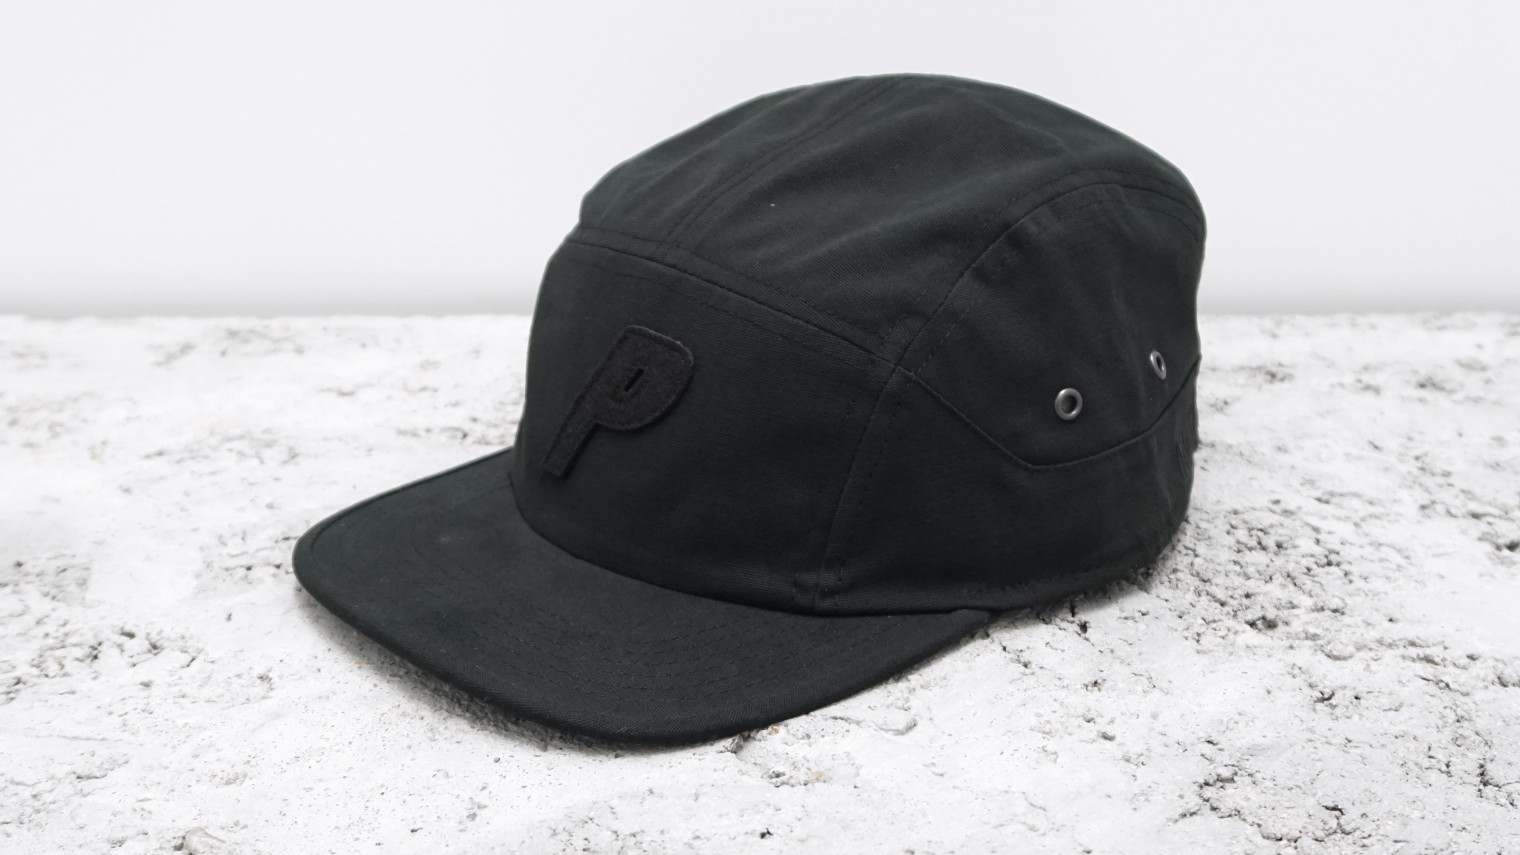 Palace Skateboards Head in a New Direction with Their New 7-Panel Hats ...